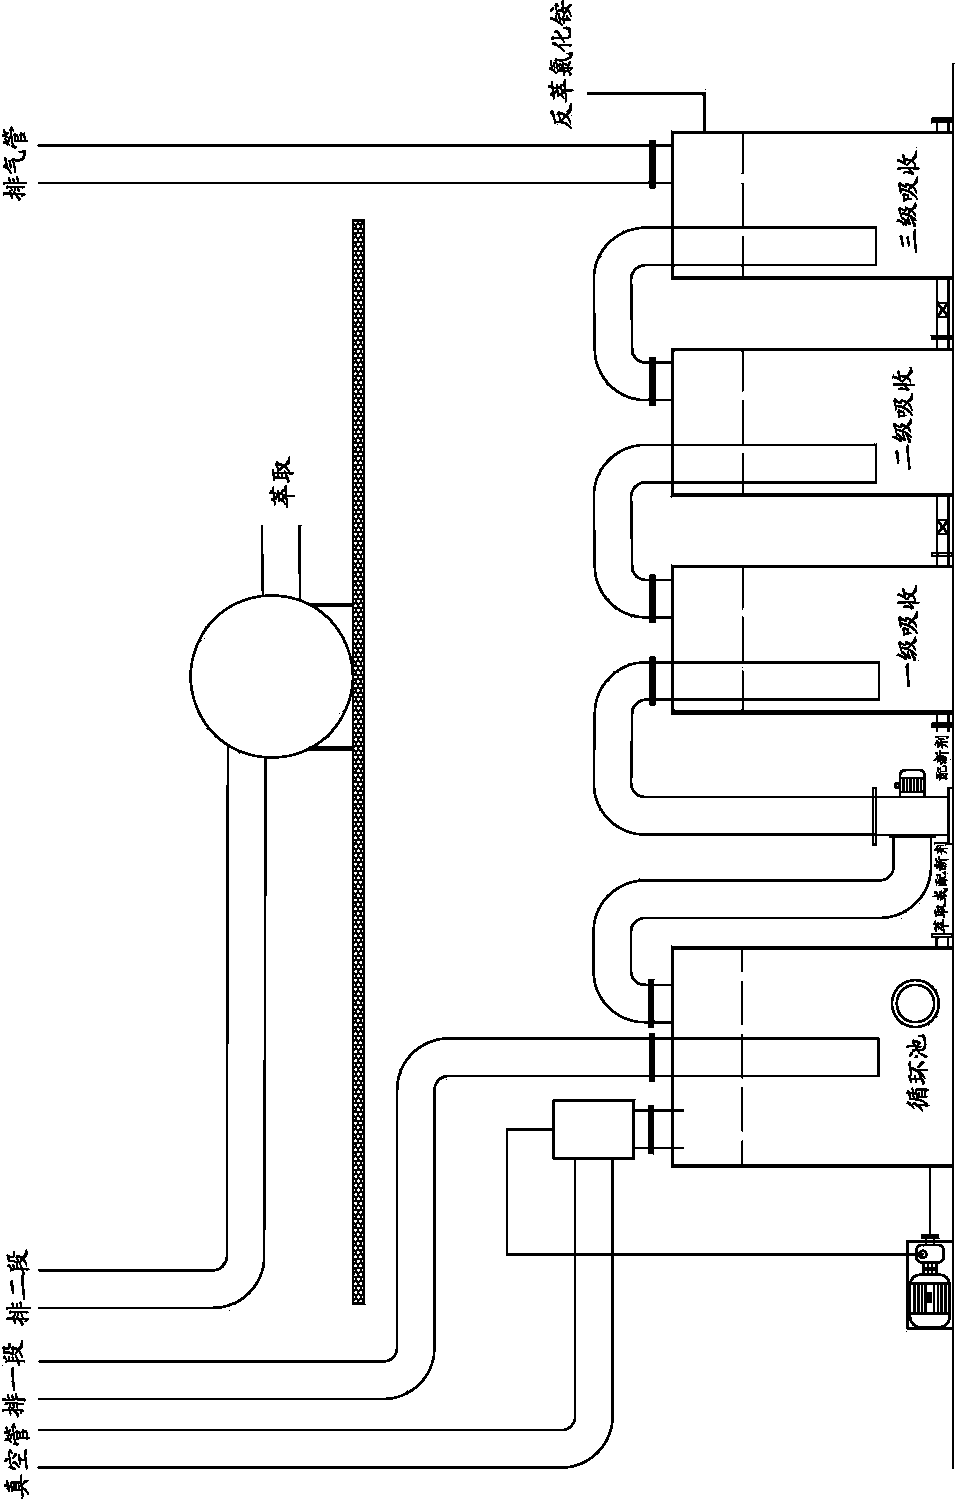 Method for treating ammonia nitrogen in tungsten smelting by using extraction absorption